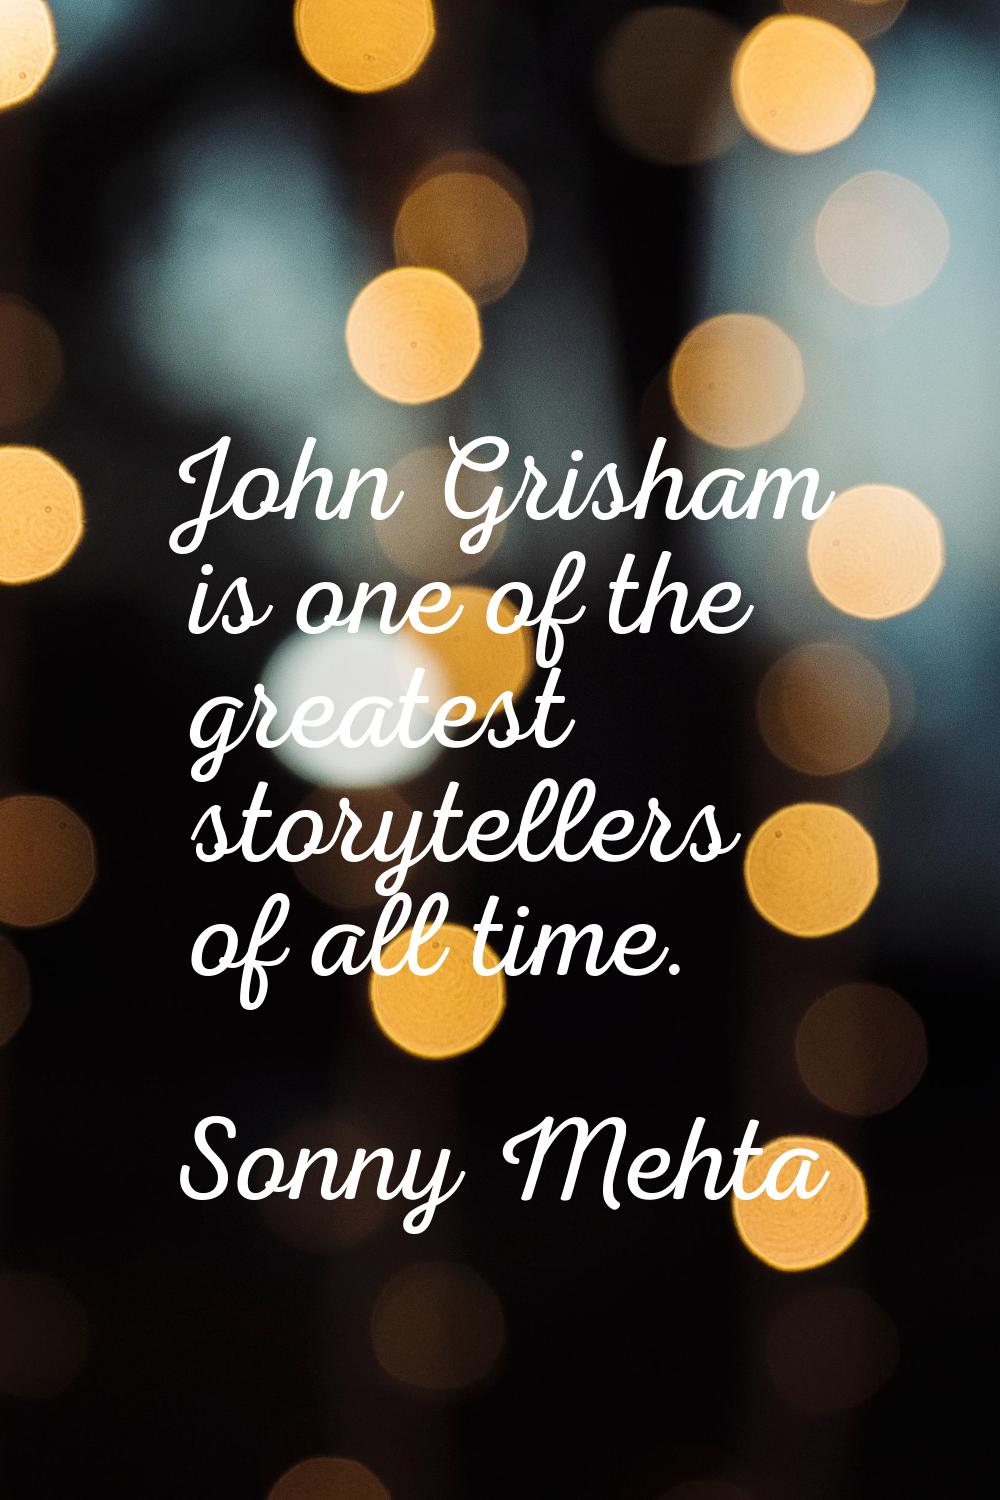 John Grisham is one of the greatest storytellers of all time.